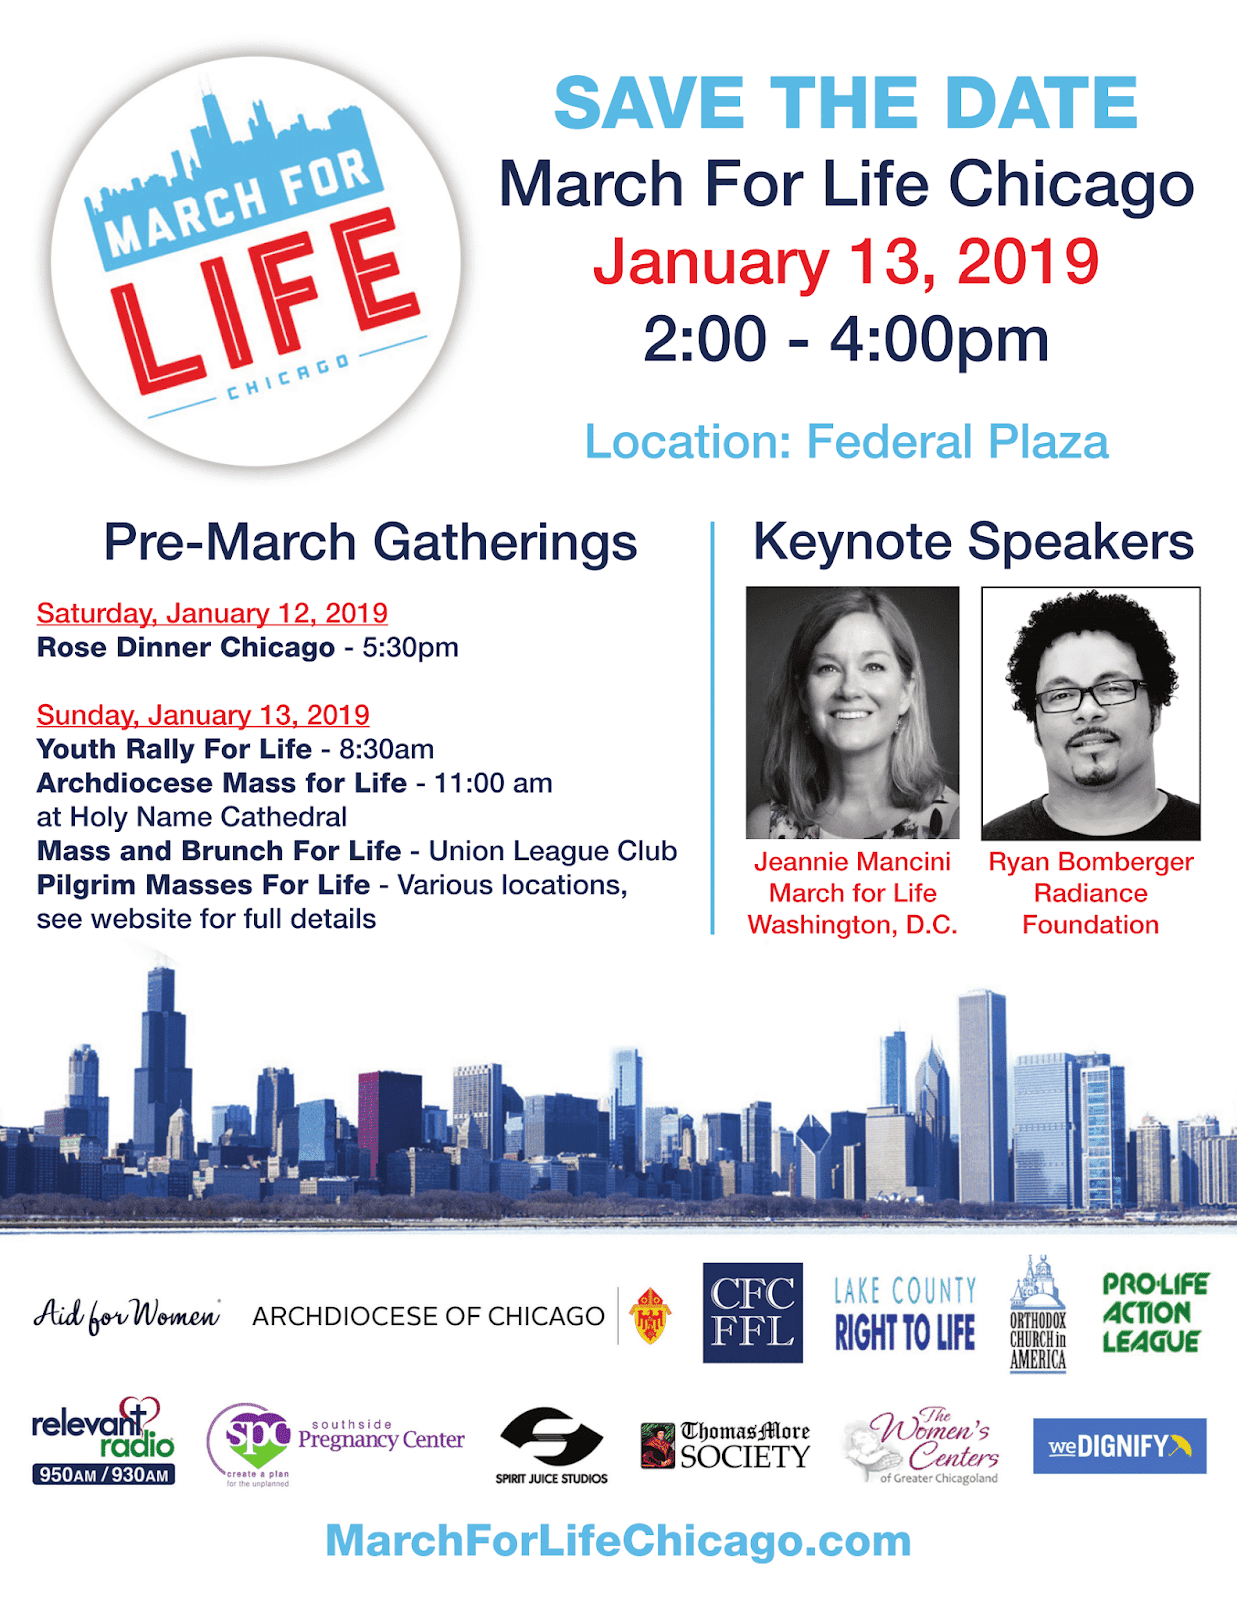 Illinois Federation for Right to Life: March for Life Chicago 2019